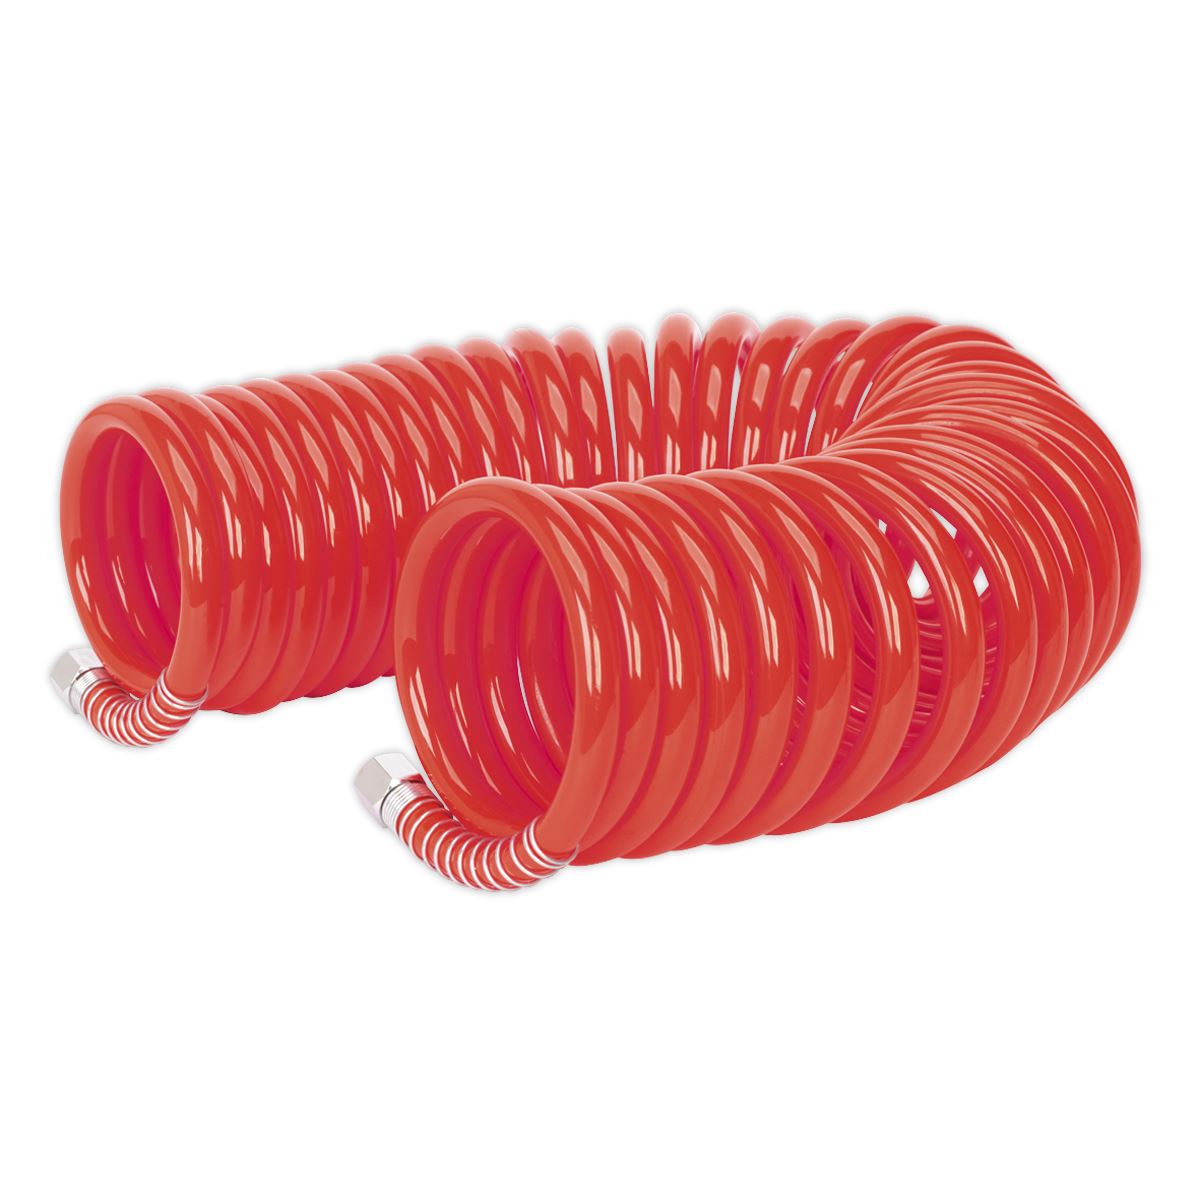 Sealey PU Coiled Air Hose 10m x Ø8mm with 1/4"BSP Unions